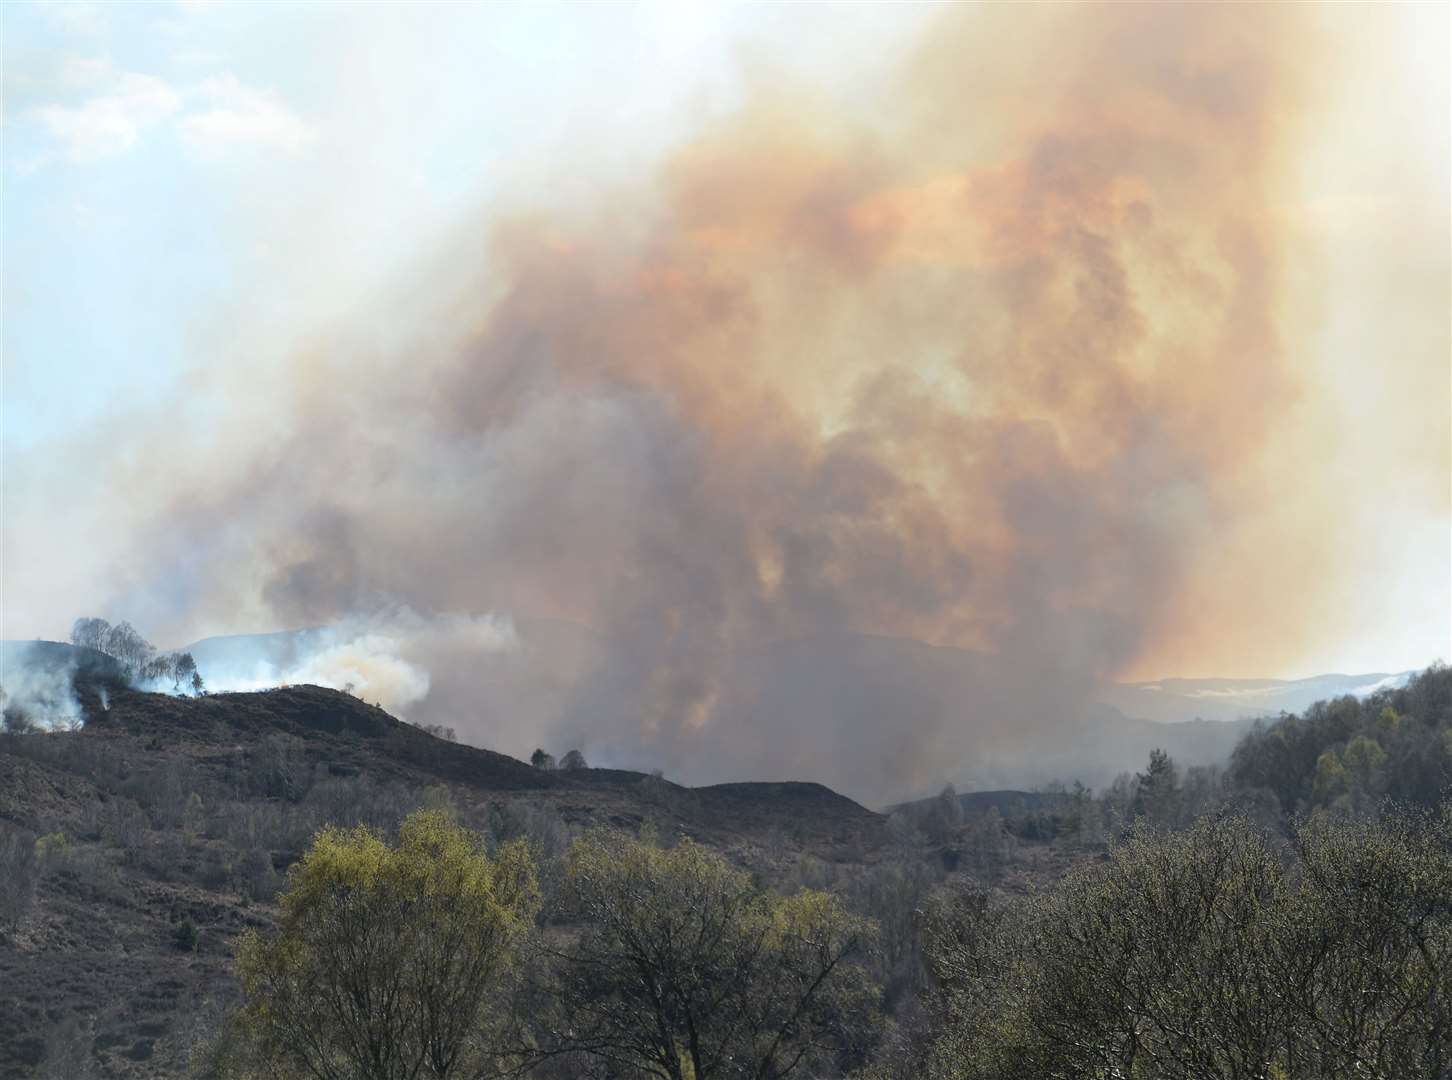 Fire spread quickly on the hills above Tarvie in April. Picture: Gary Anthony/HNM